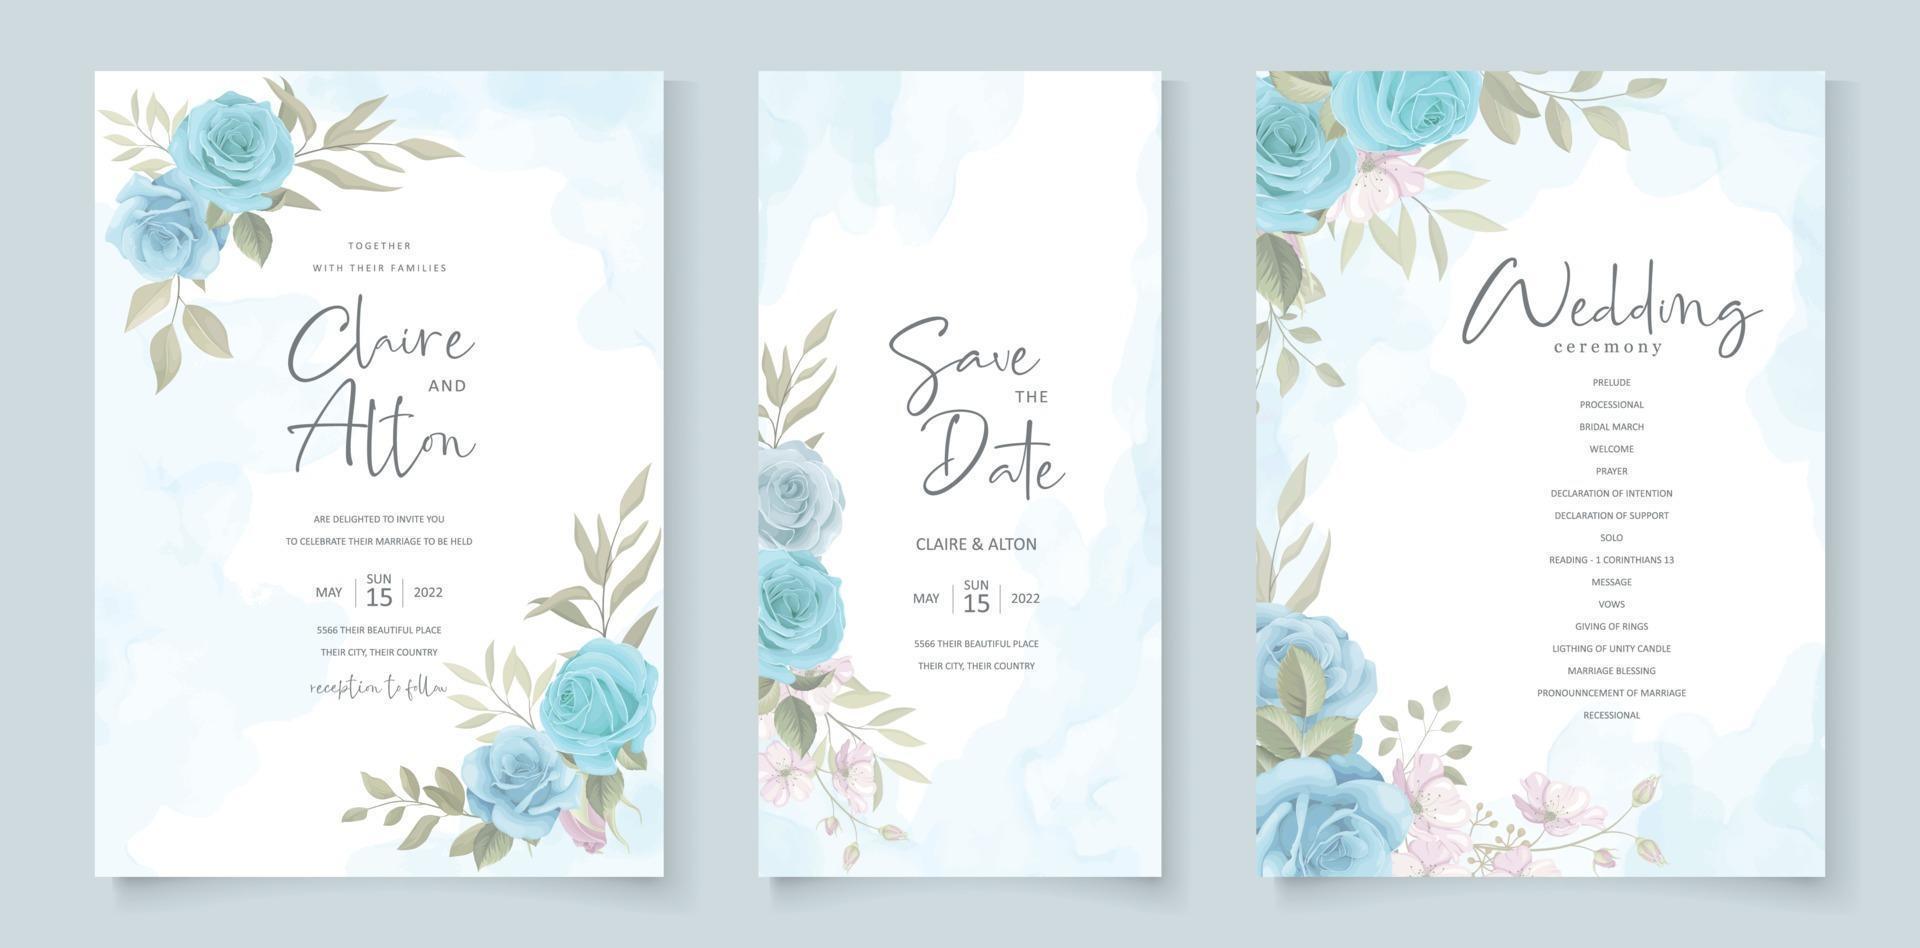 Wedding invitation template with blue floral design vector